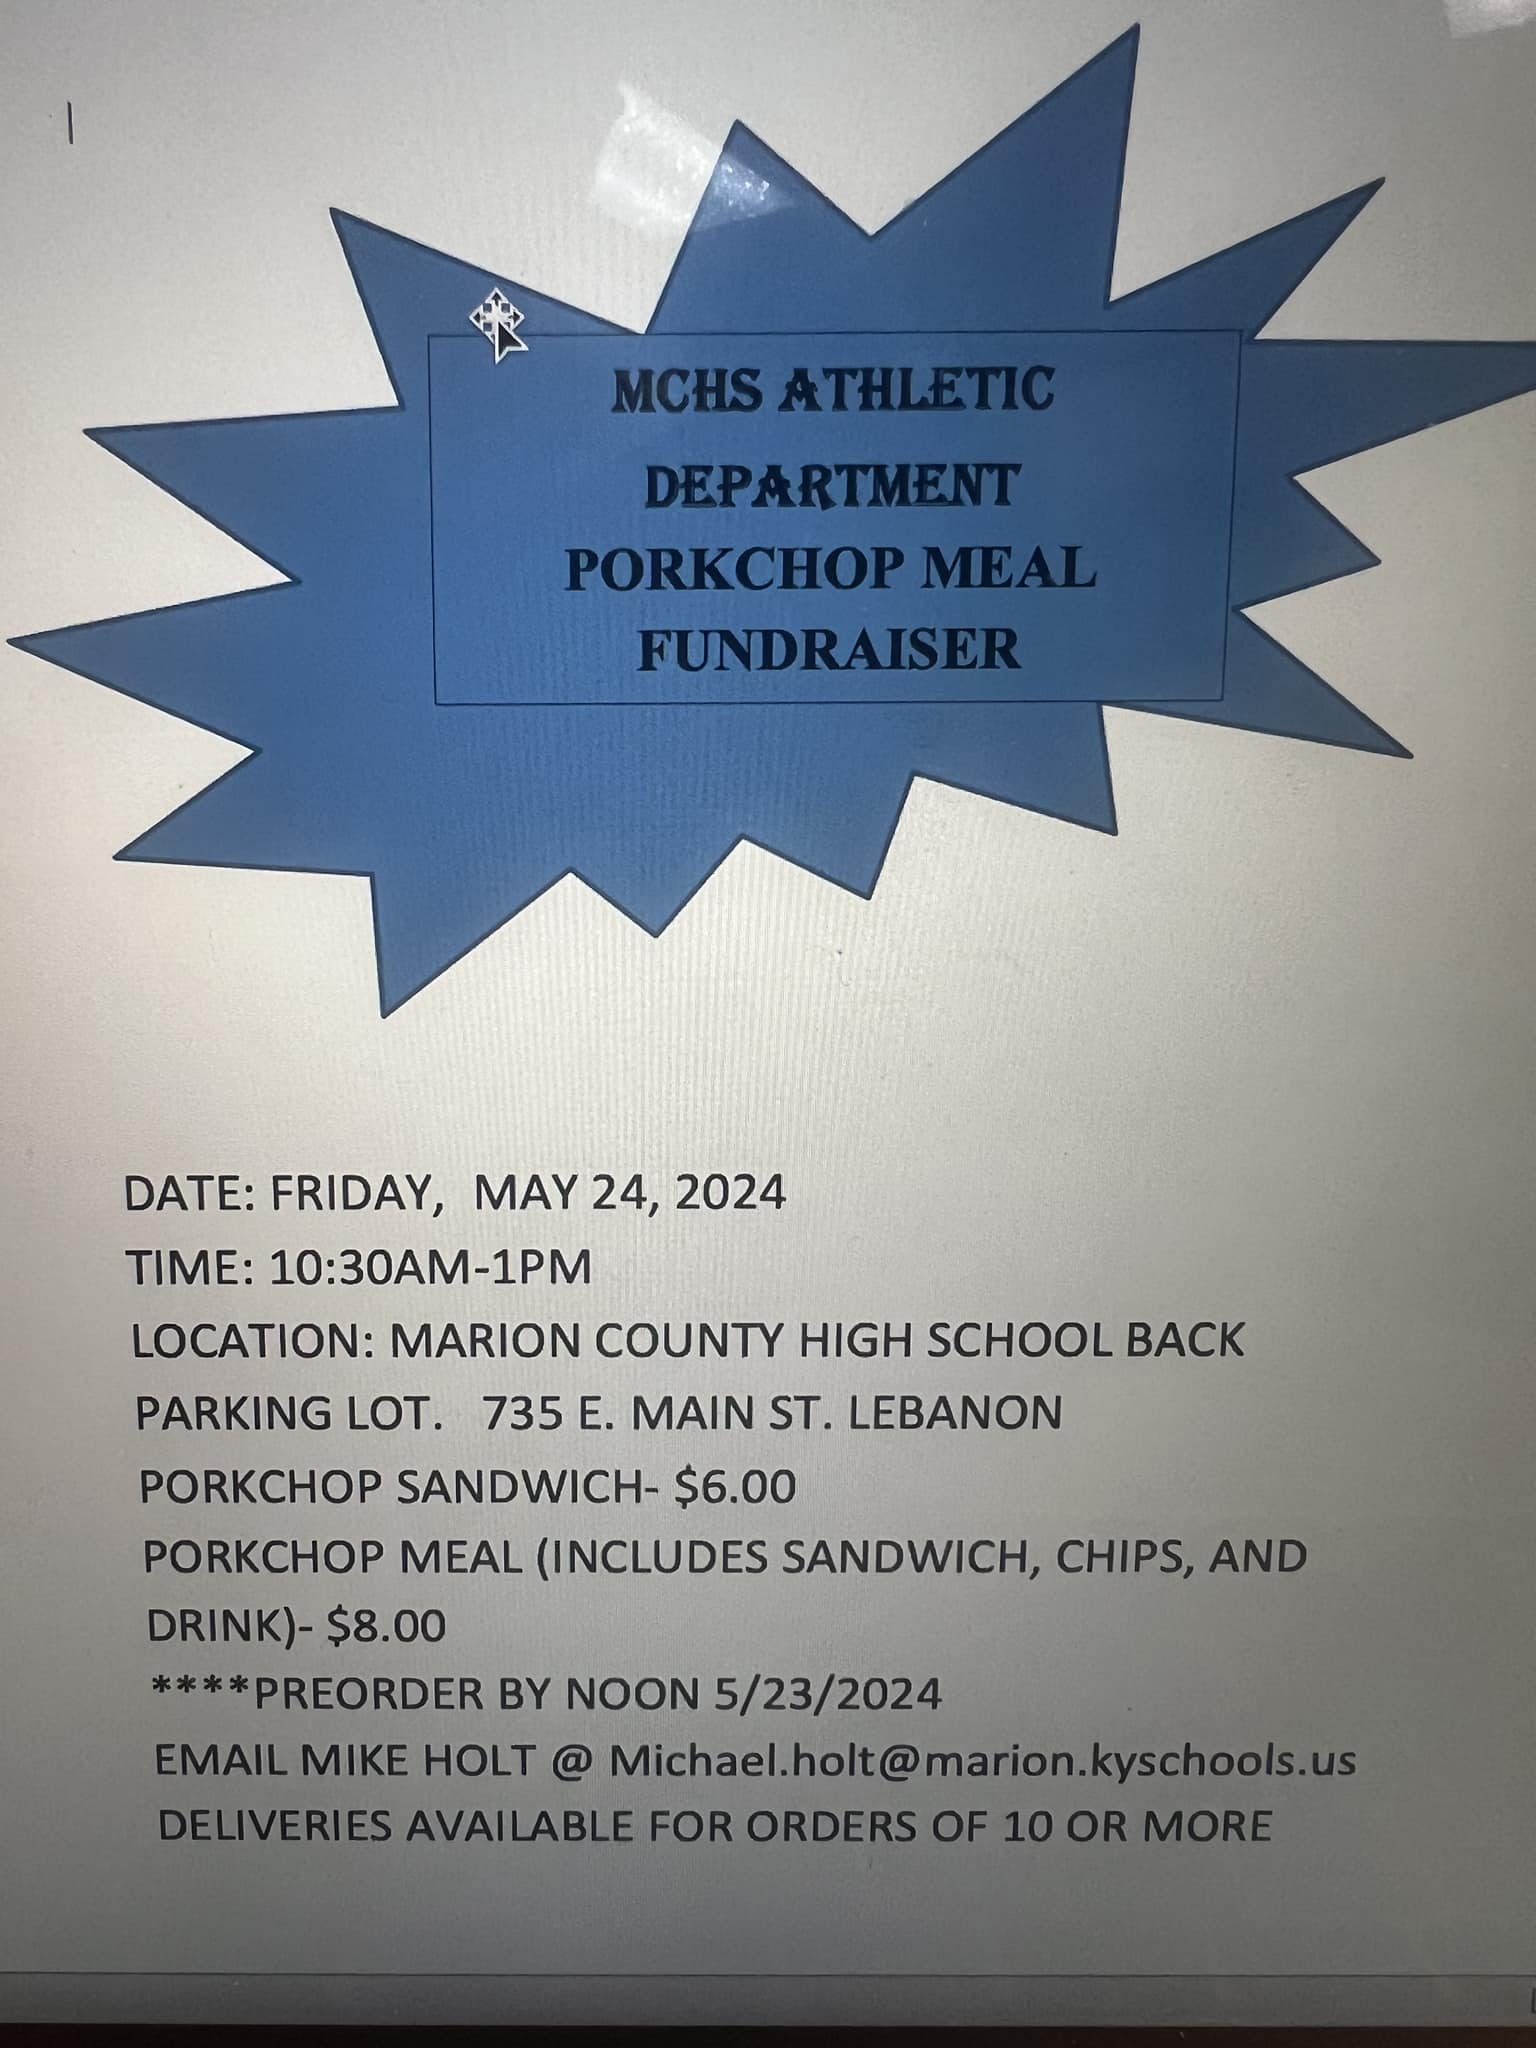 Pork Chop Meal Fundraiser for MCHS Athletic Department